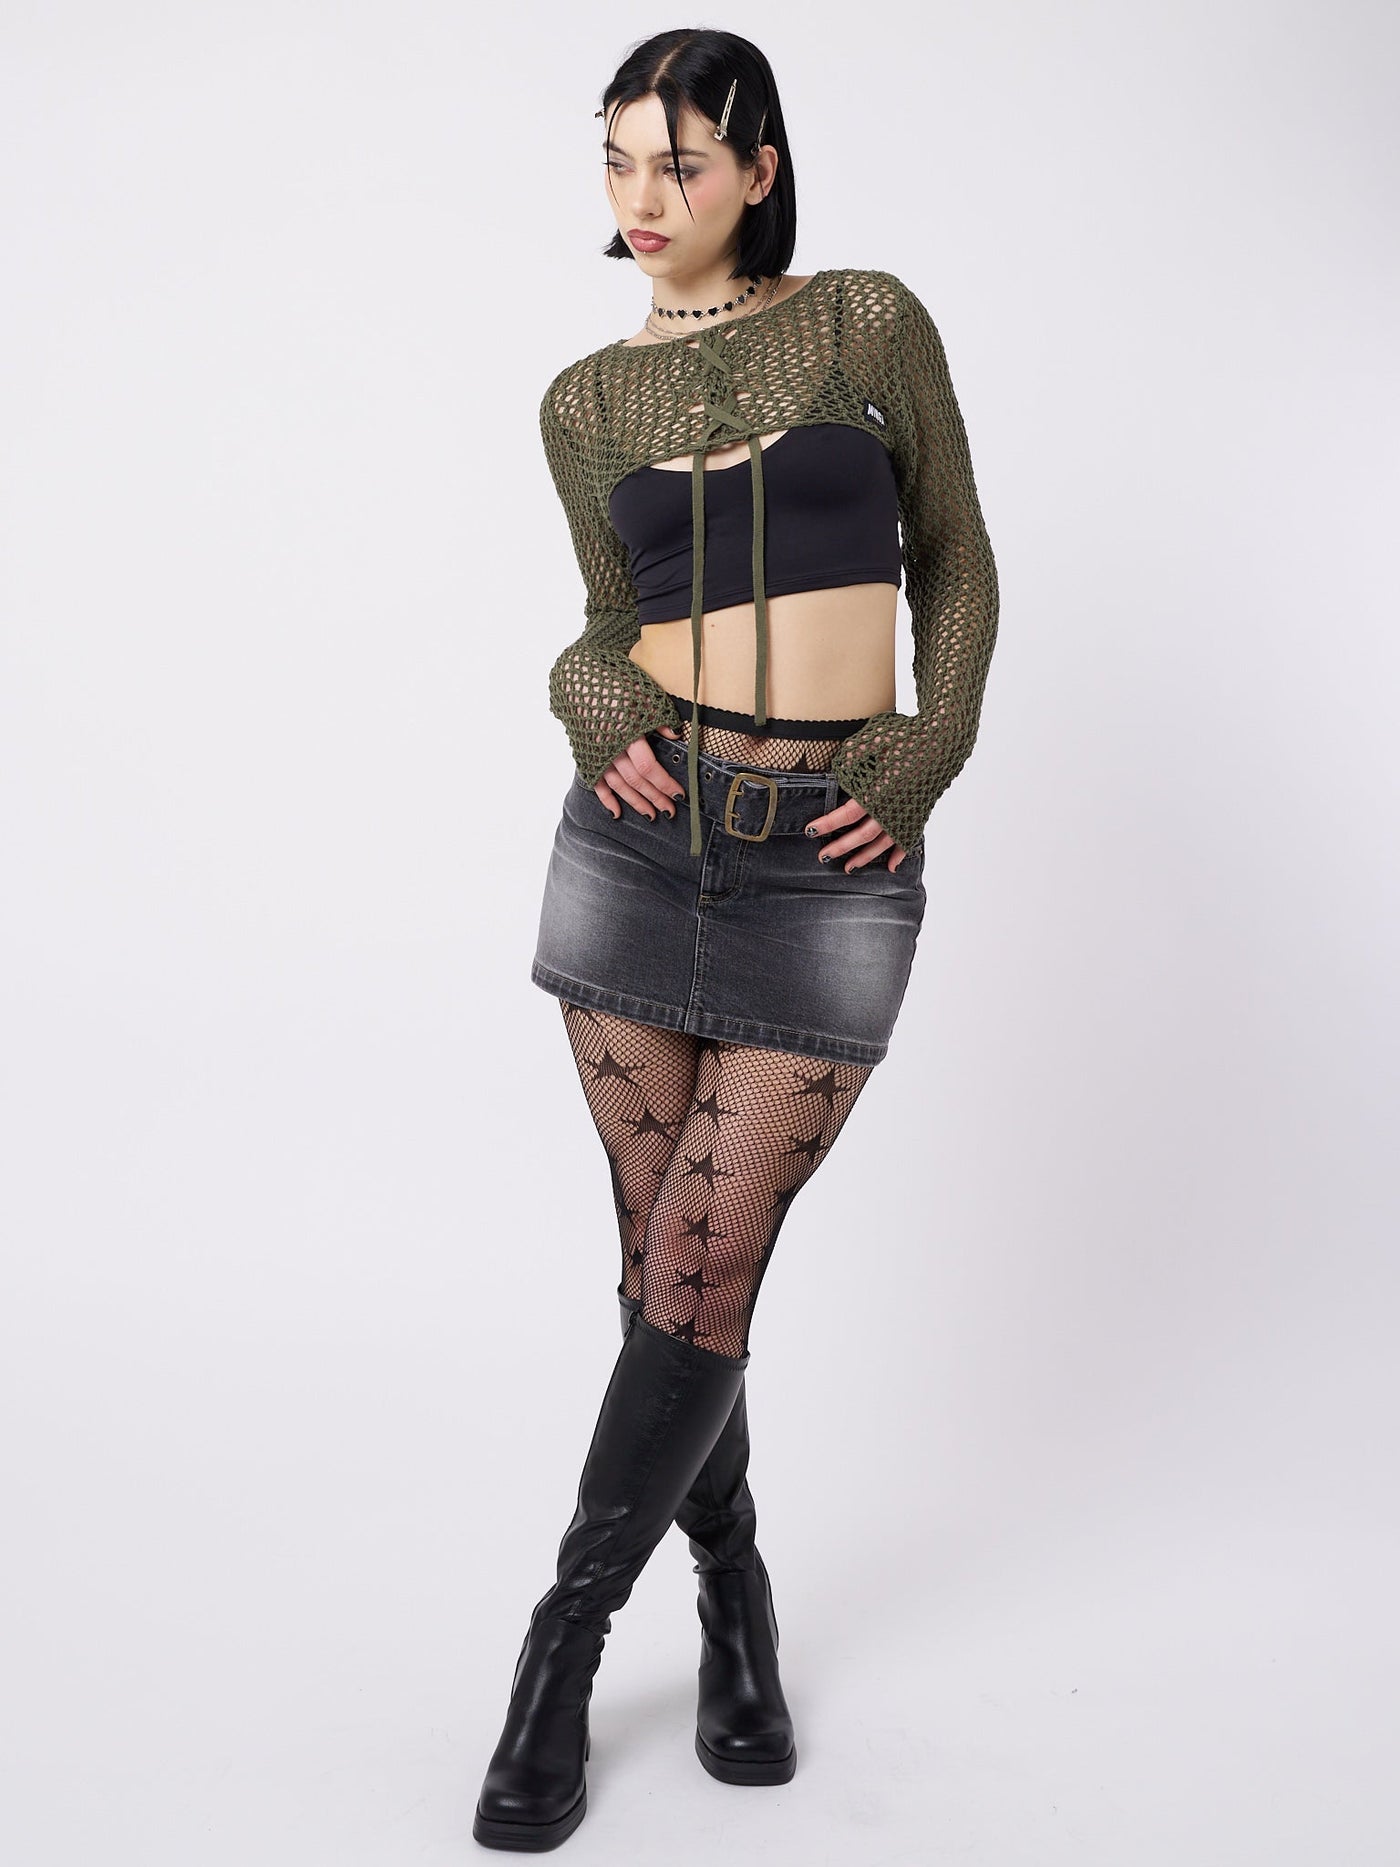 Ramona Green Lace Up Knitted Shrug